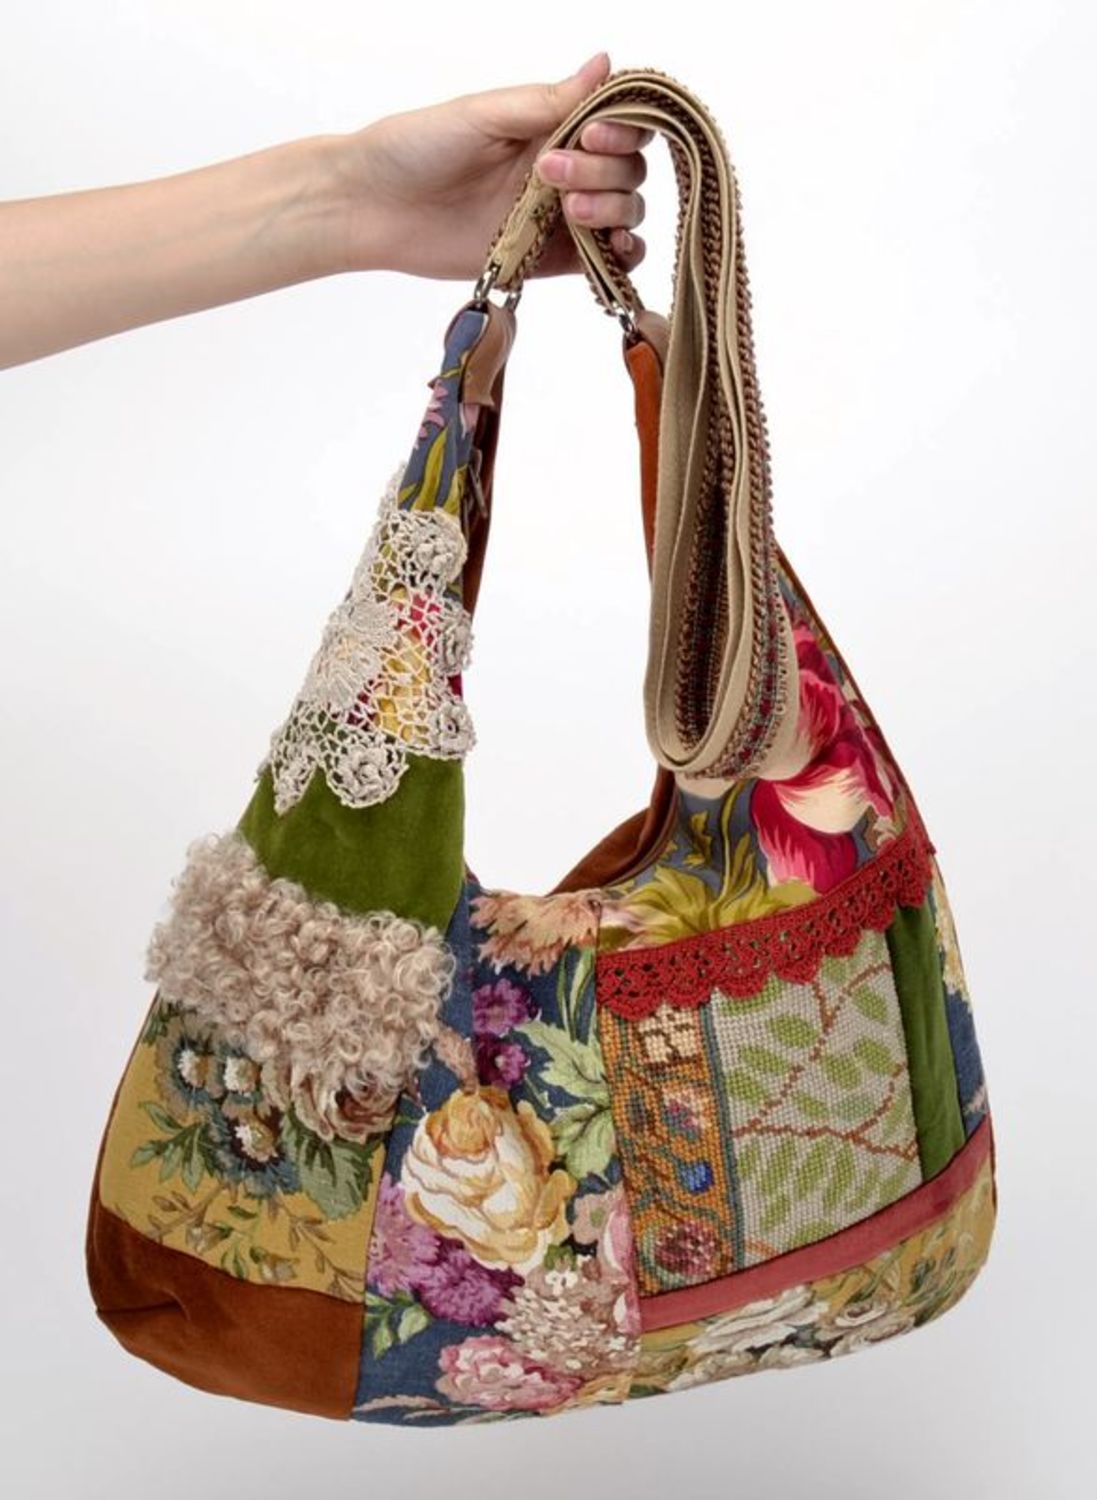 Faric patchwork bag  photo 3